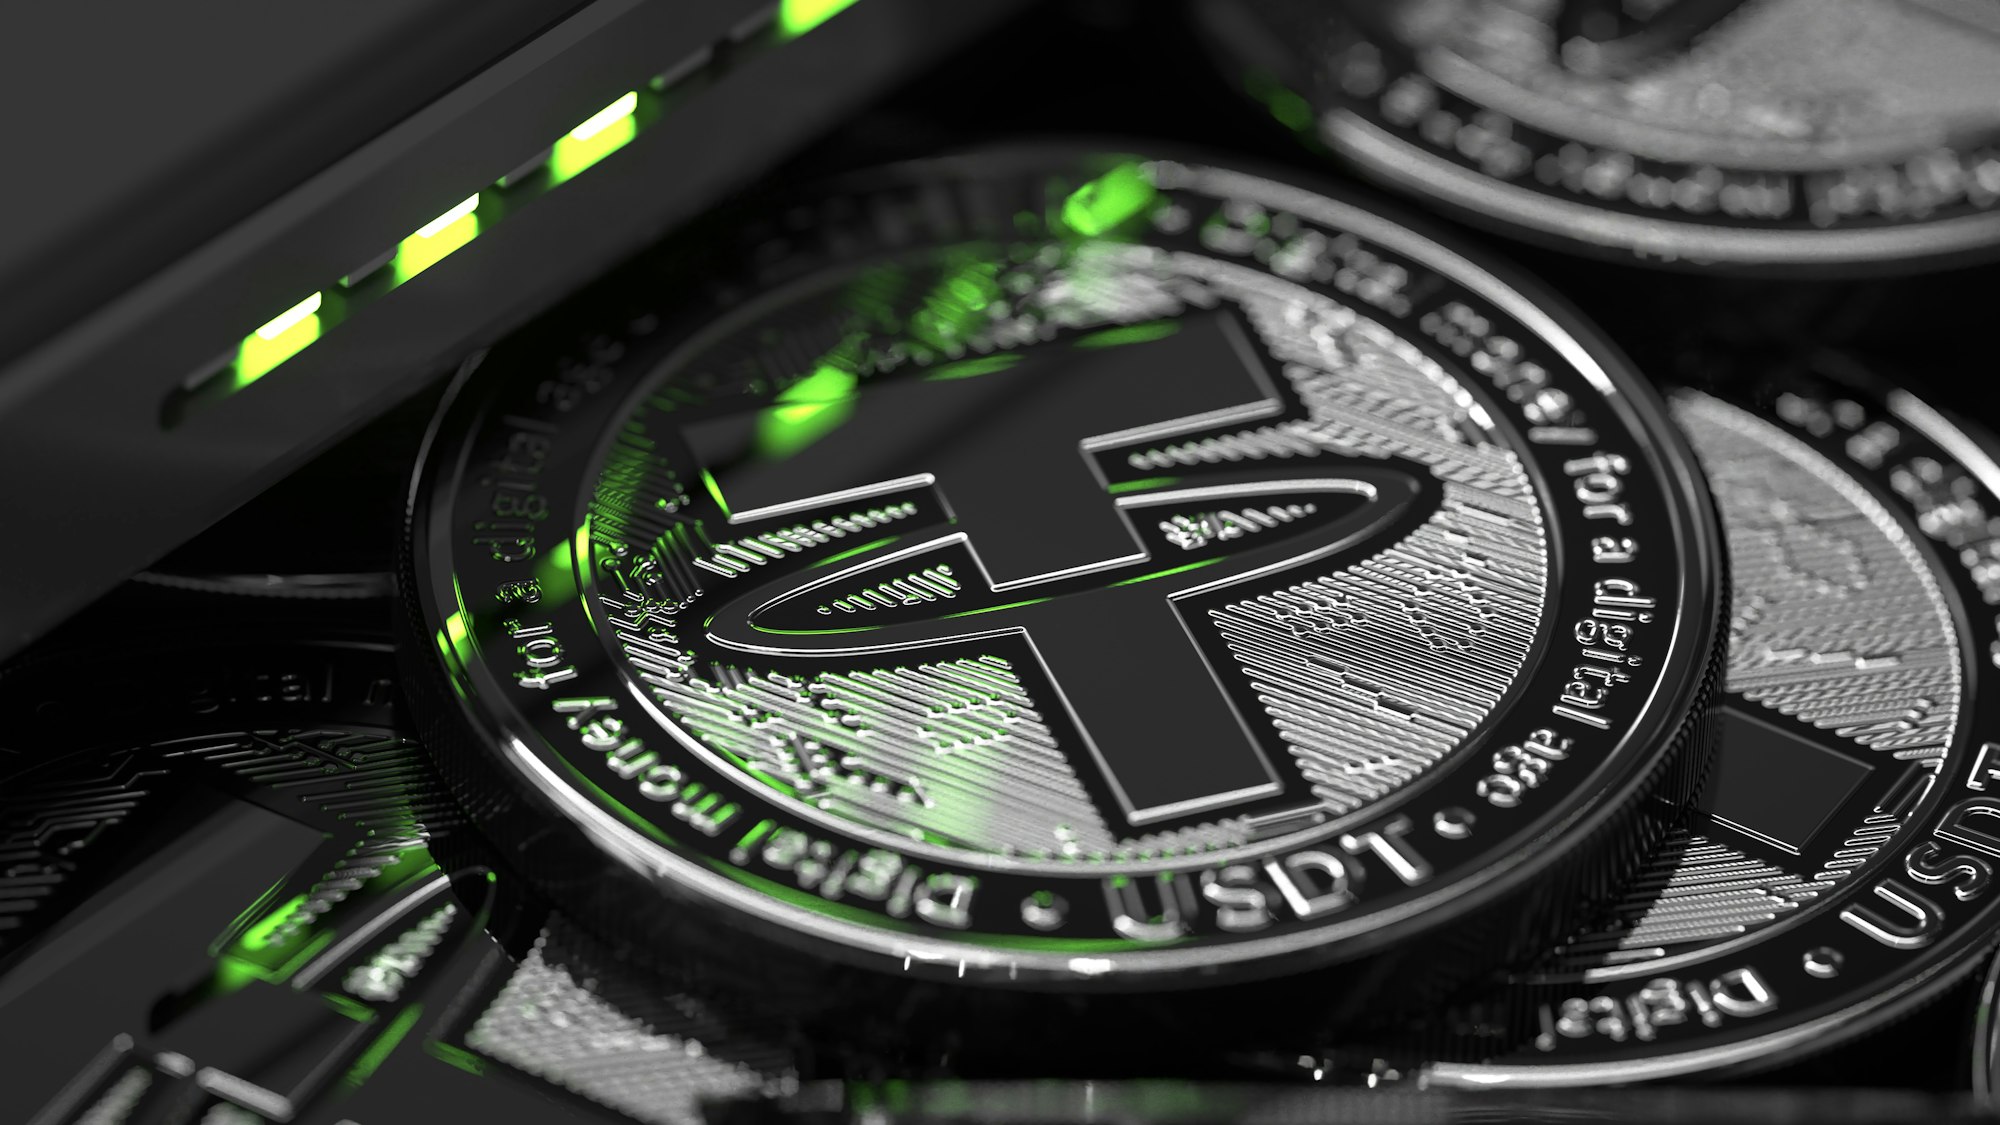 Tether 4K 3D-rendered illustration. Found more like this in 10 different crypto currencies in our DrawKit collection.